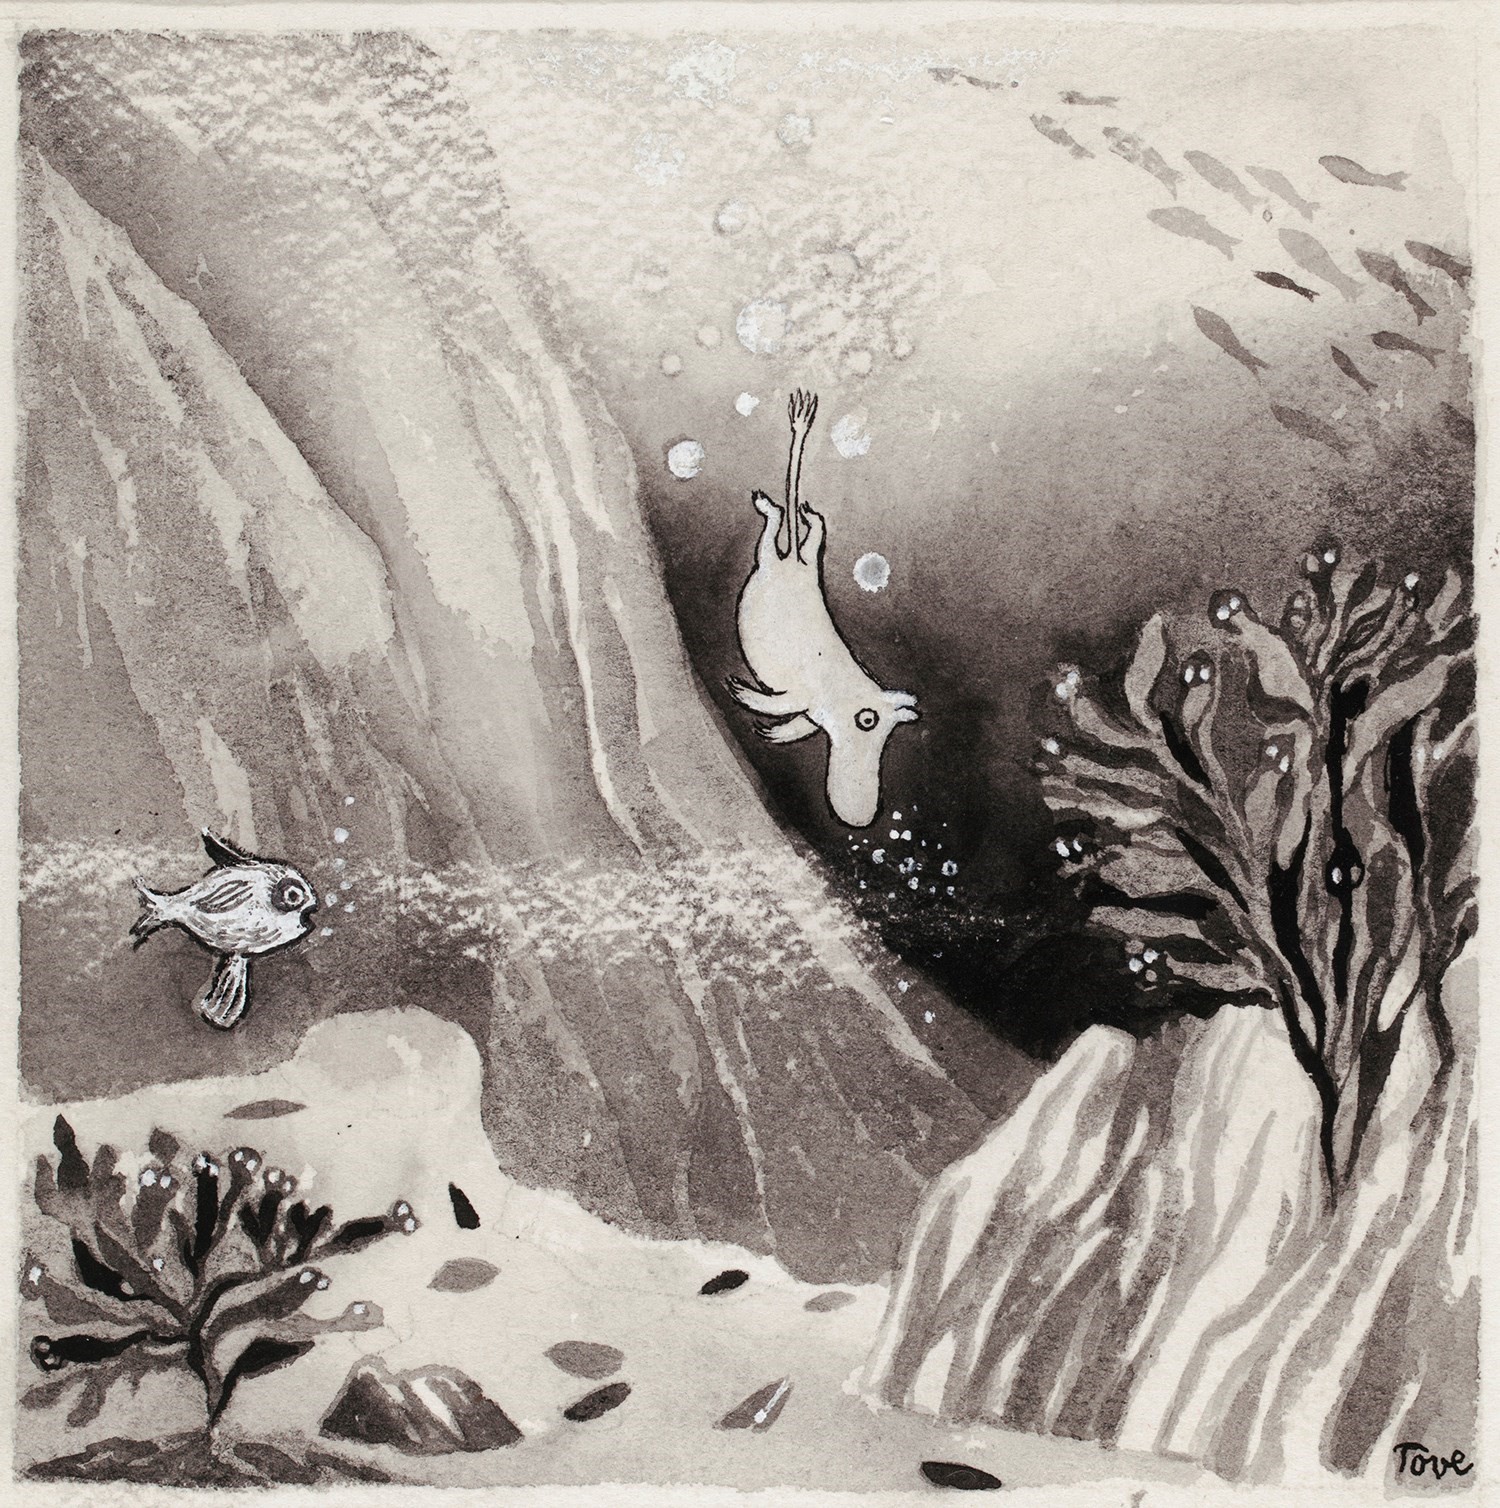 Illustration for the book Comet in Moominland